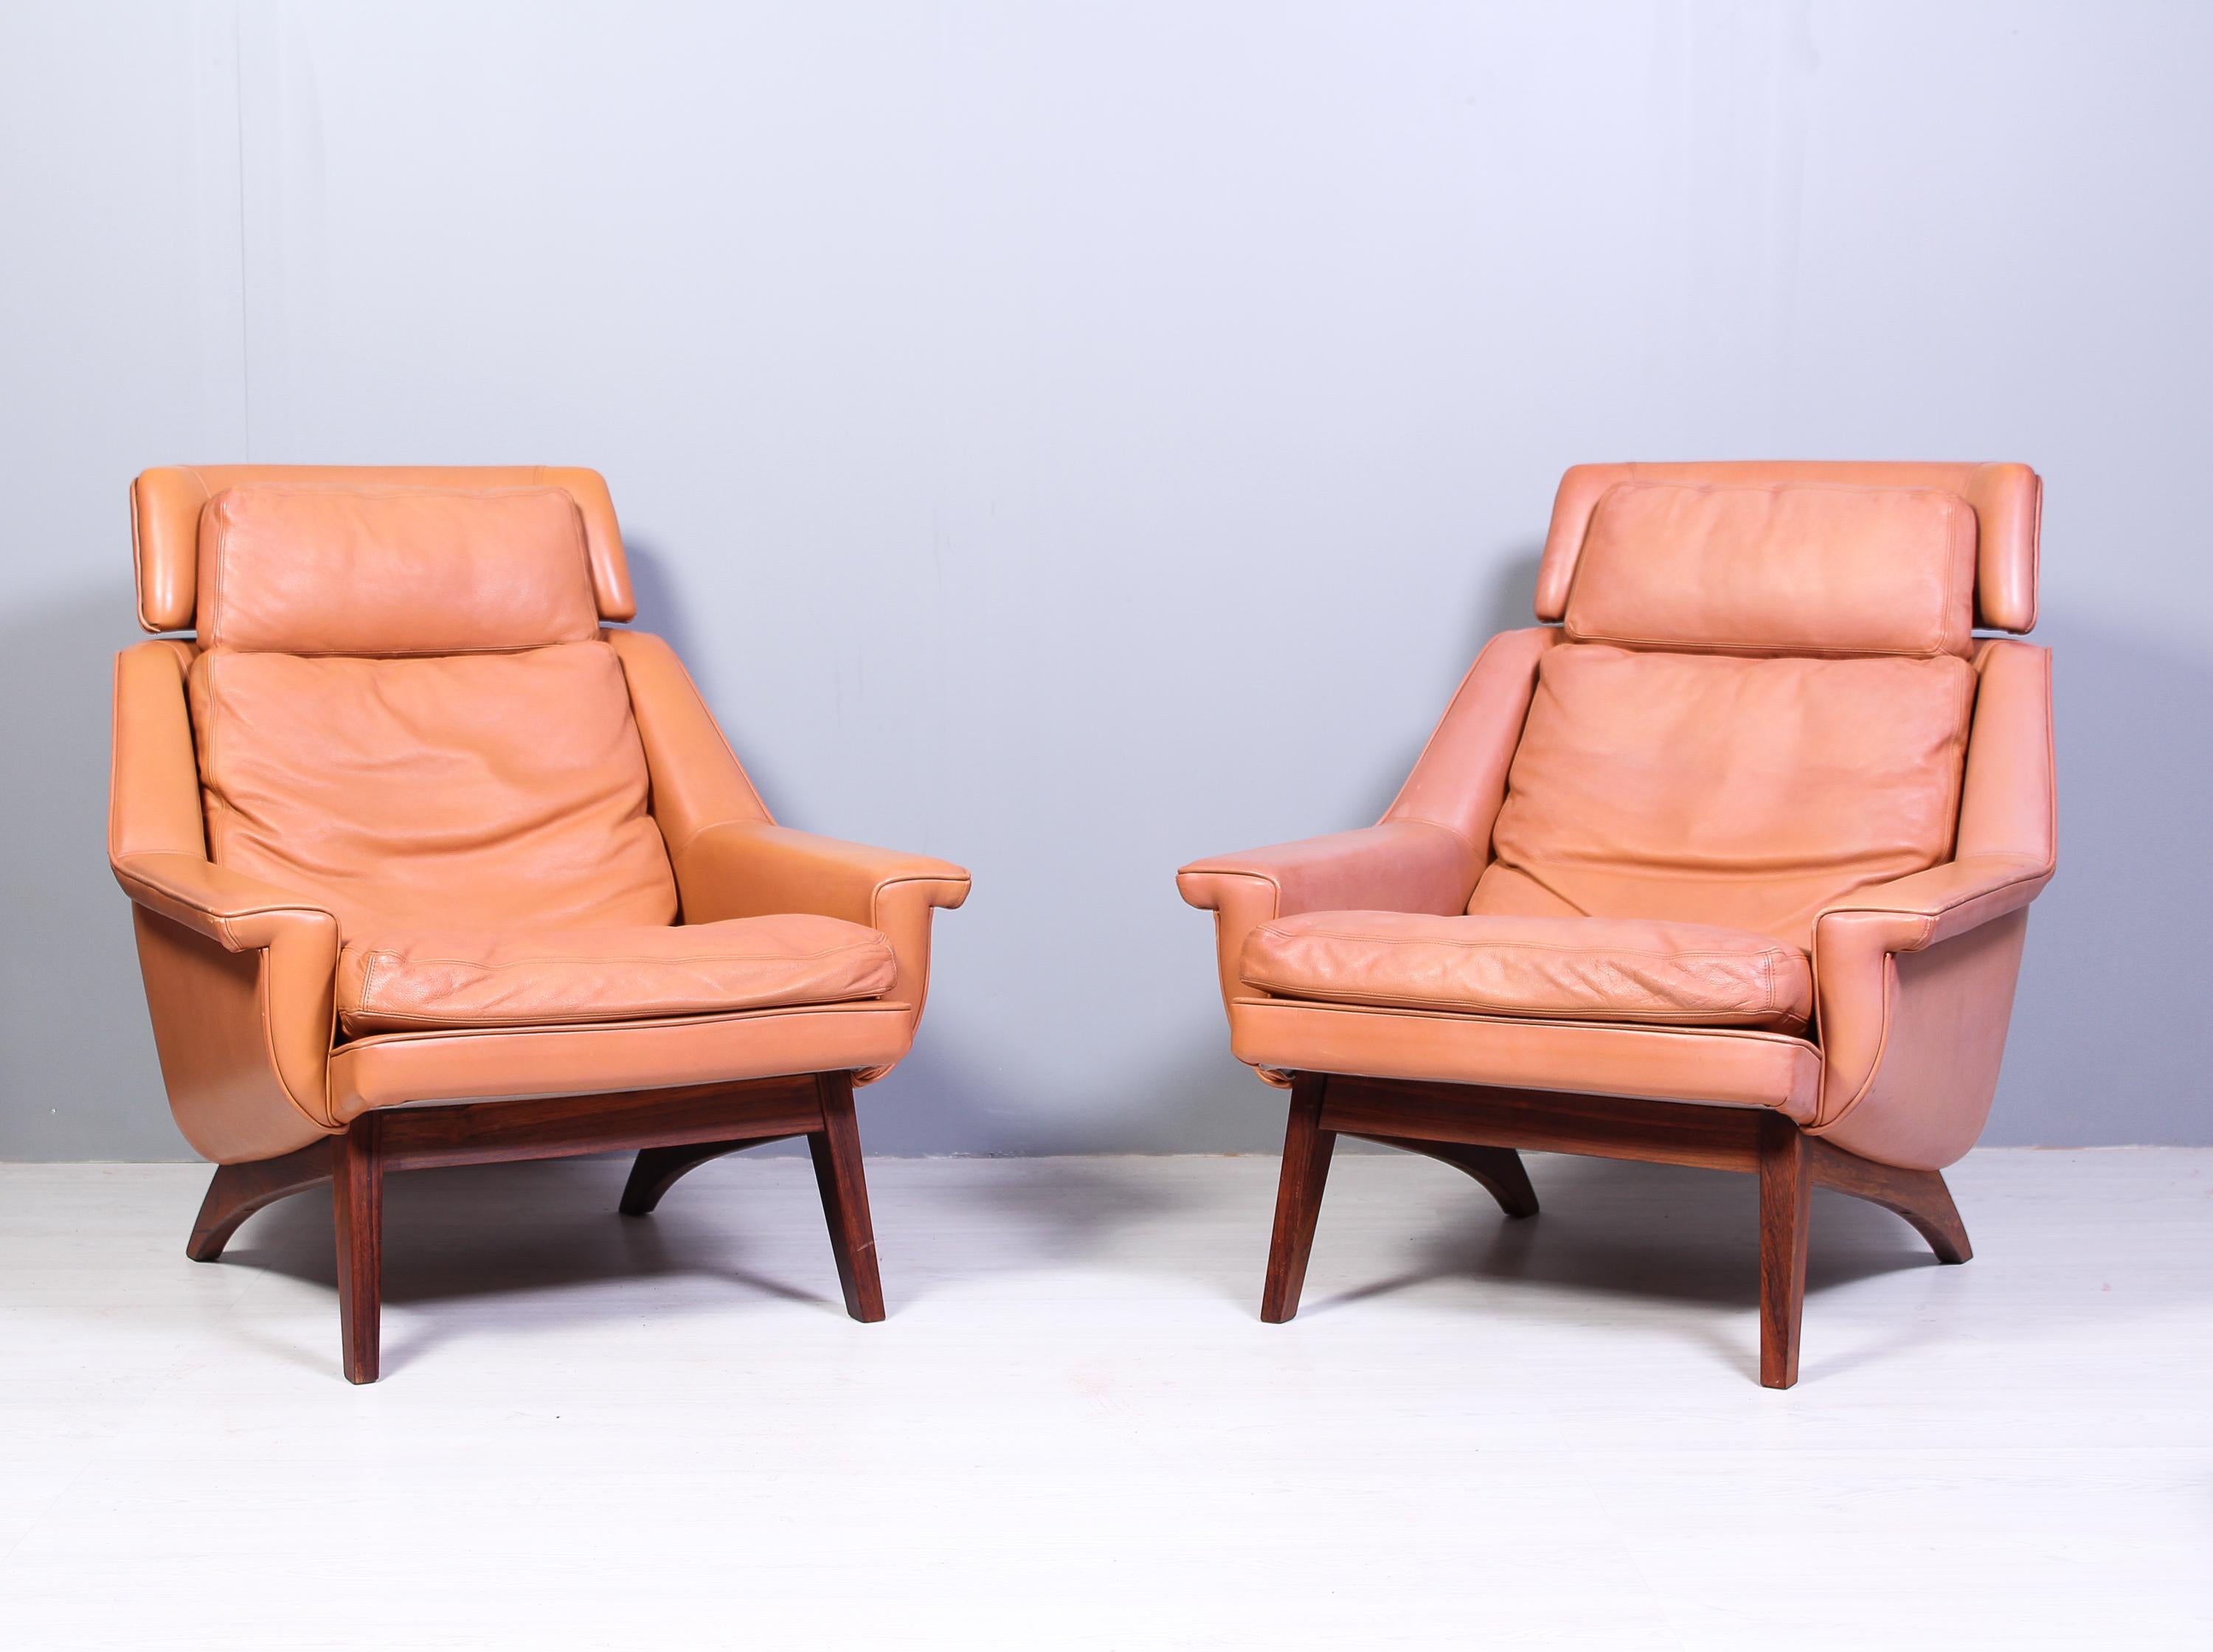 A pair of midcentury lounge chairs and an ottoman designed by Werner Langenfeld and produced by ESA in Denmark in the 1960s. The chairs and ottoman have a nice cognac colored leather upholstery and rosewood frames. This model with the rosewood frame